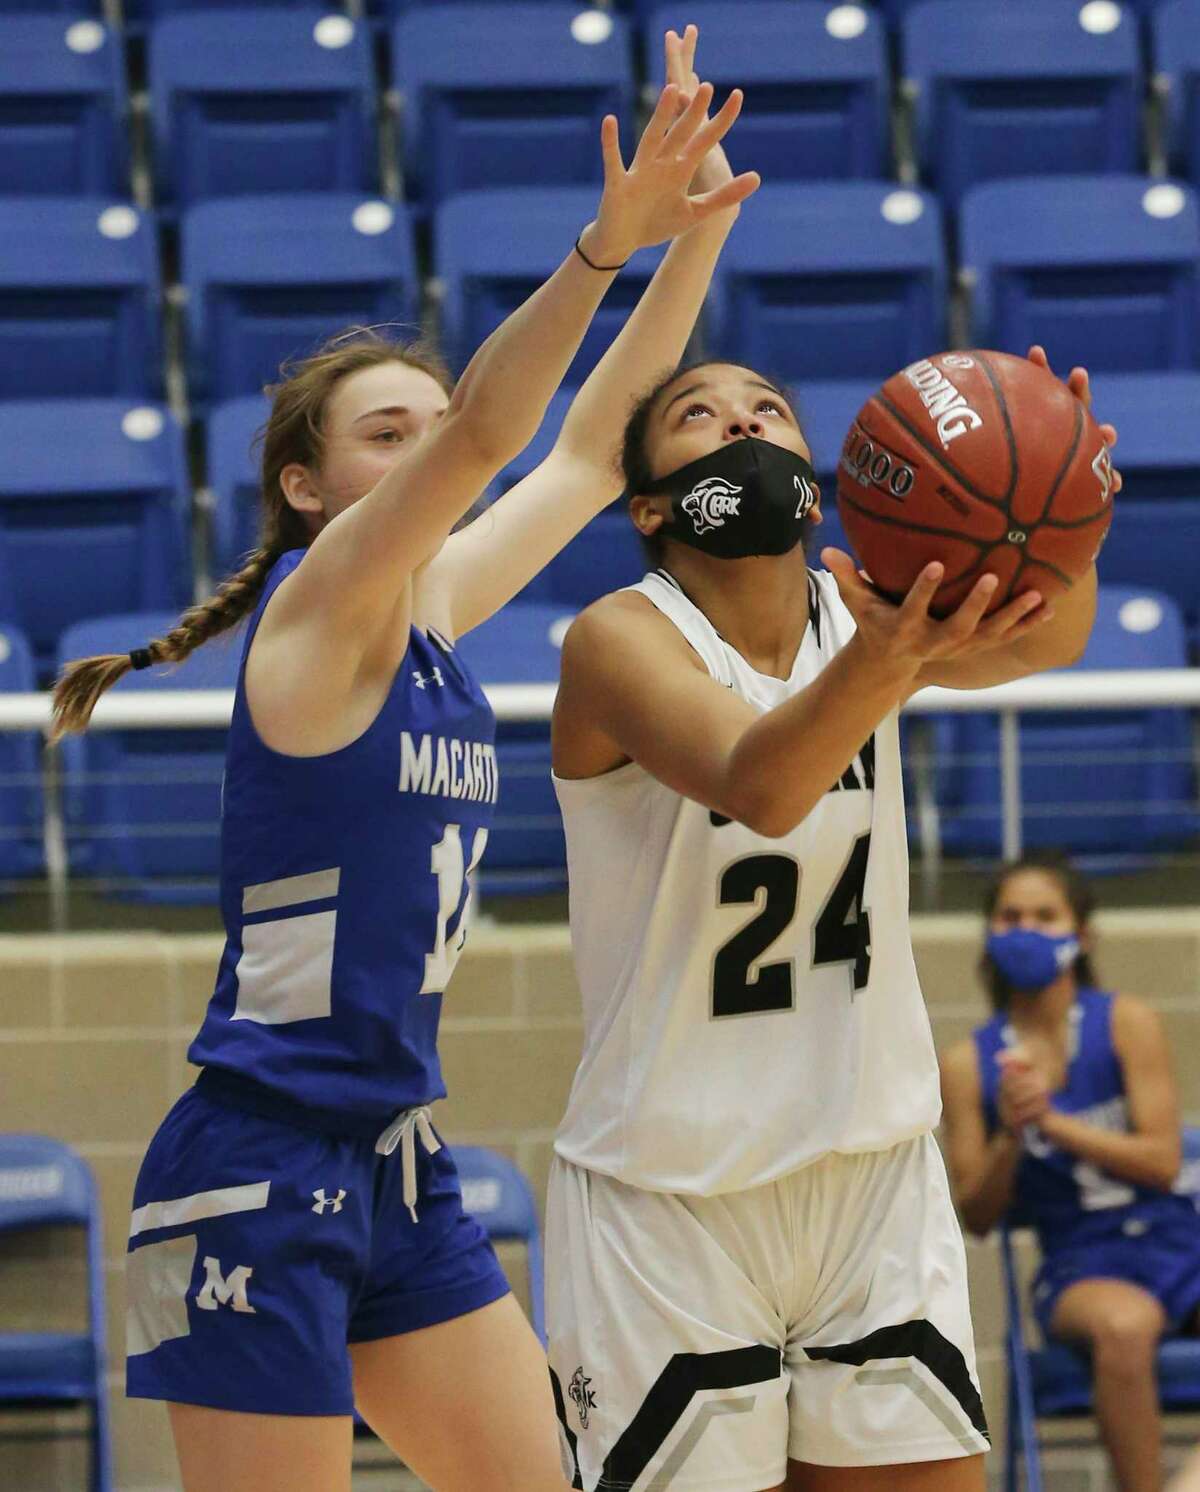 Clark's Aaliyah Roberson (24) looks to score against MacArthur's Nicole Wallace (12) in girls basketball at Northside Sports Gym on Friday, Jan. 29, 2021. The Cougars defeated the Brahmas, 58-34, to advance to the next round.